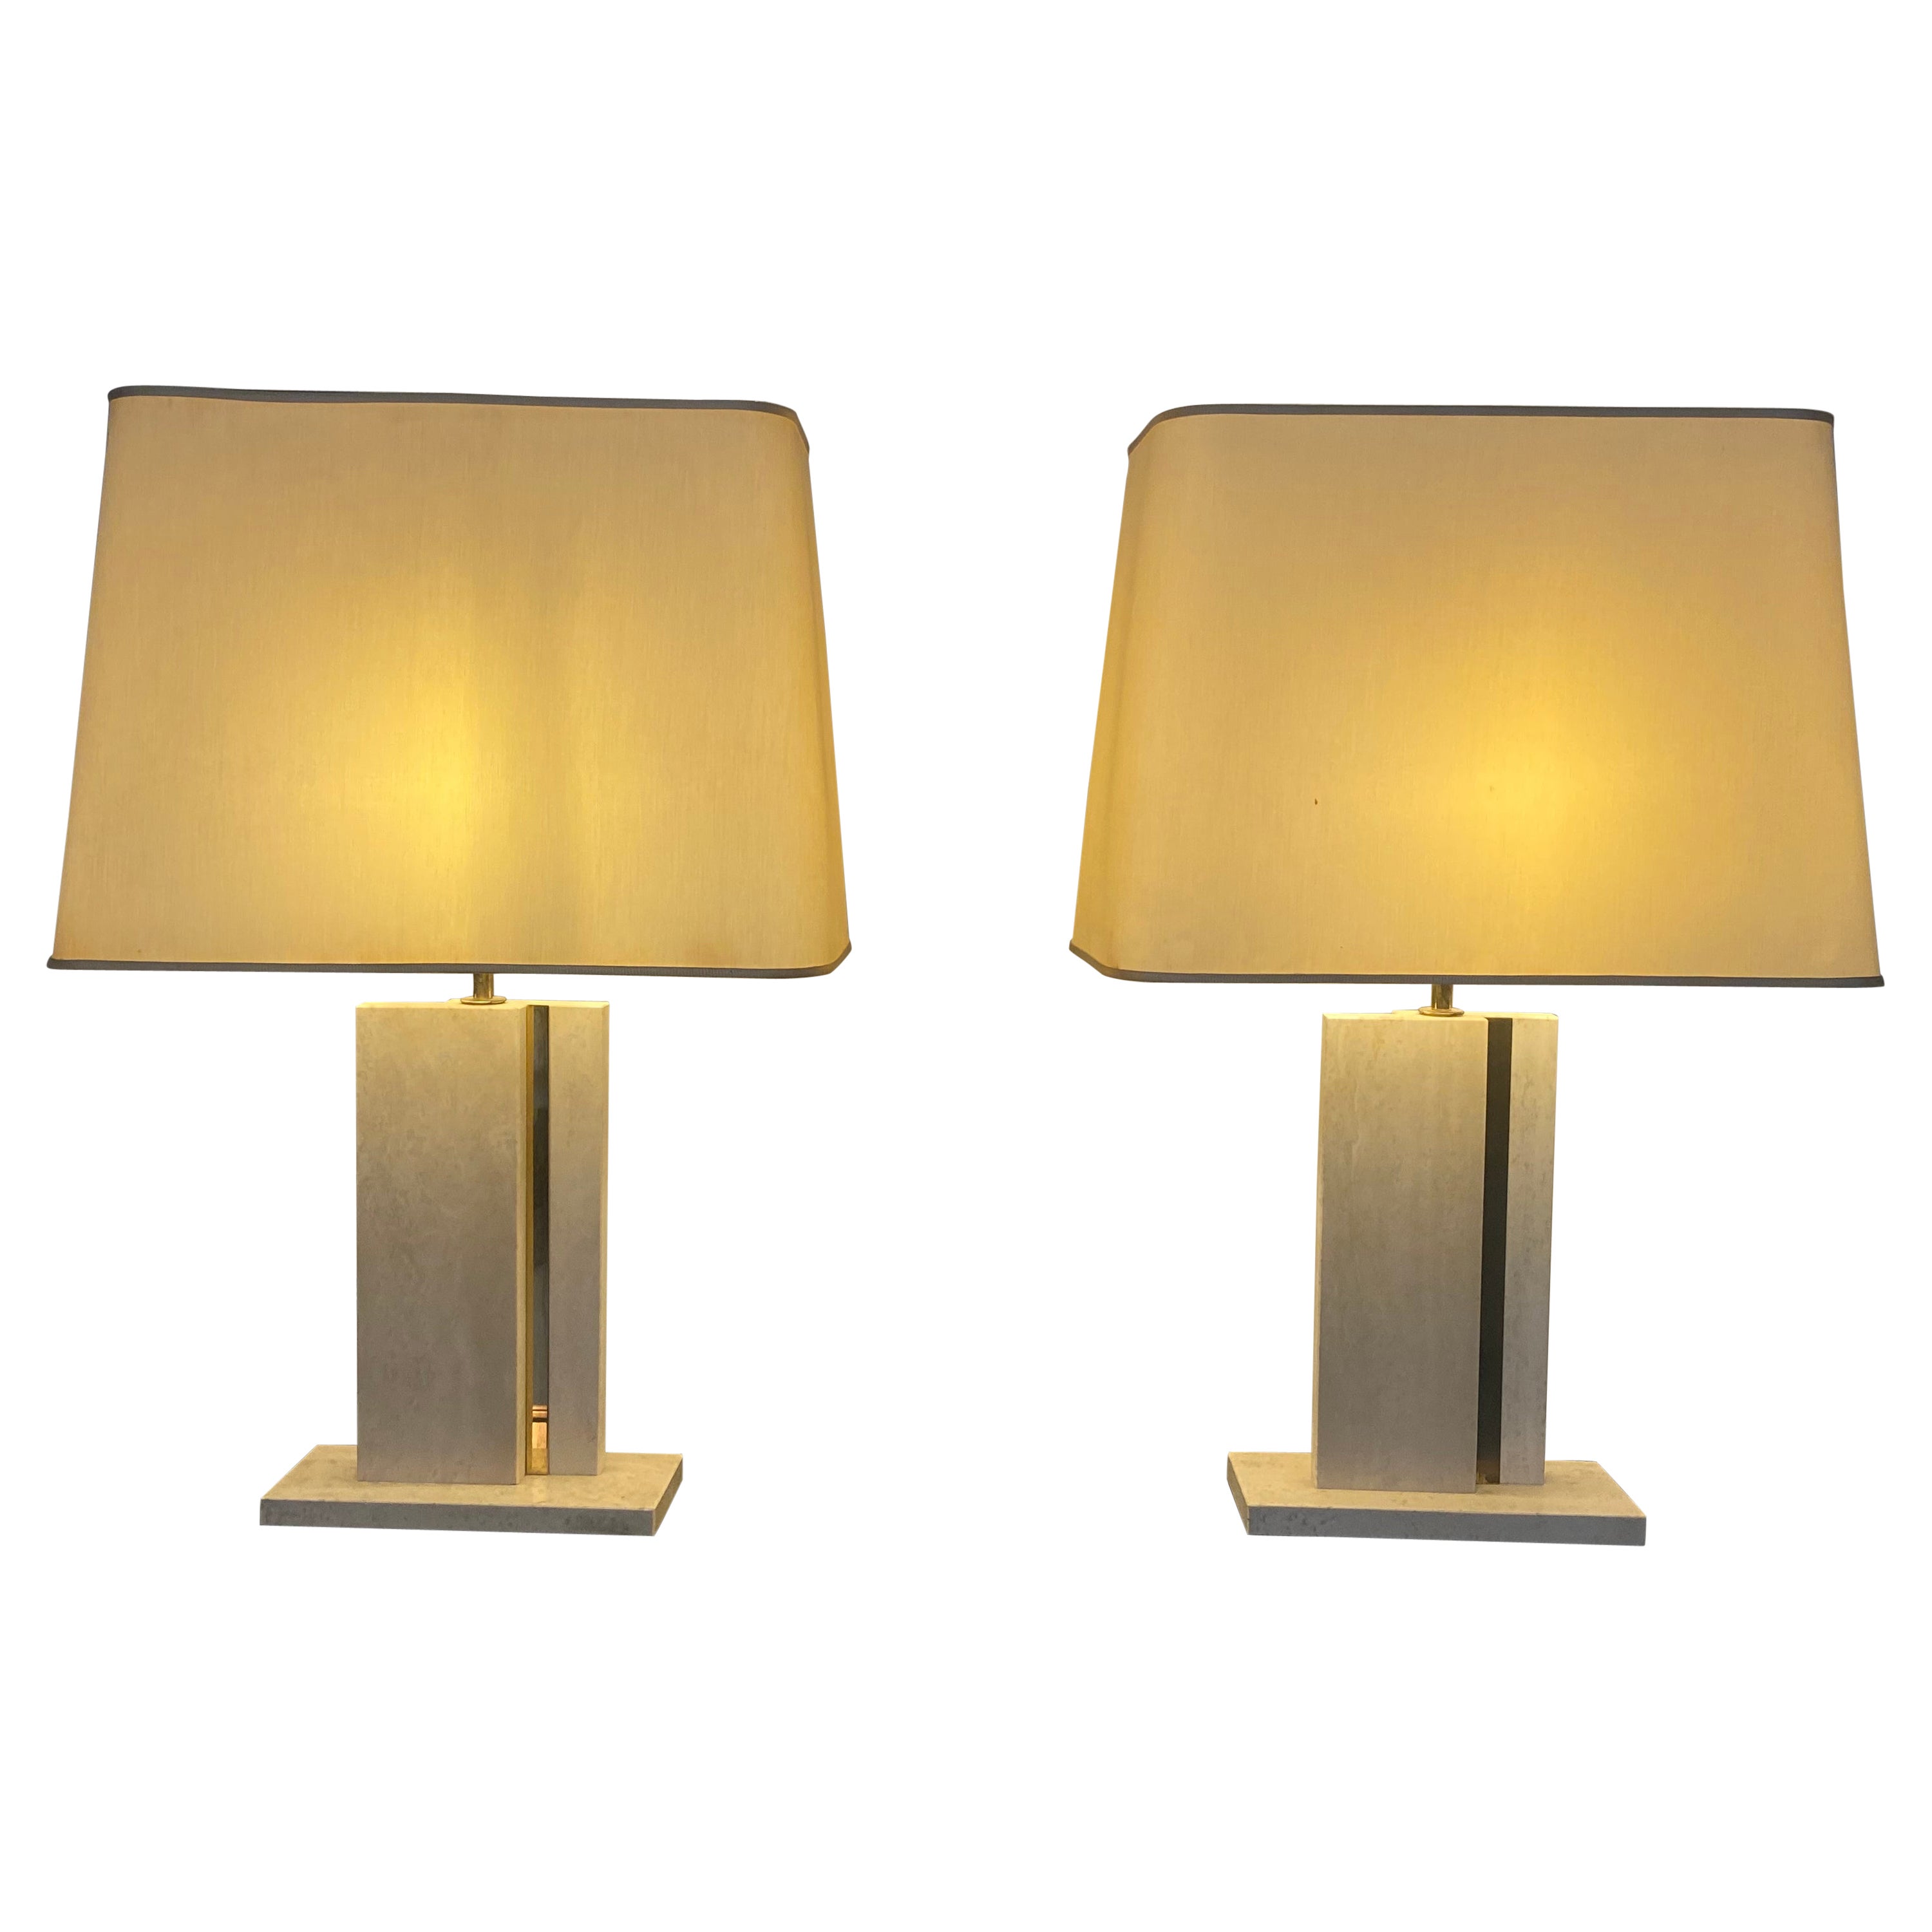  Pair of travertine and brass lamps